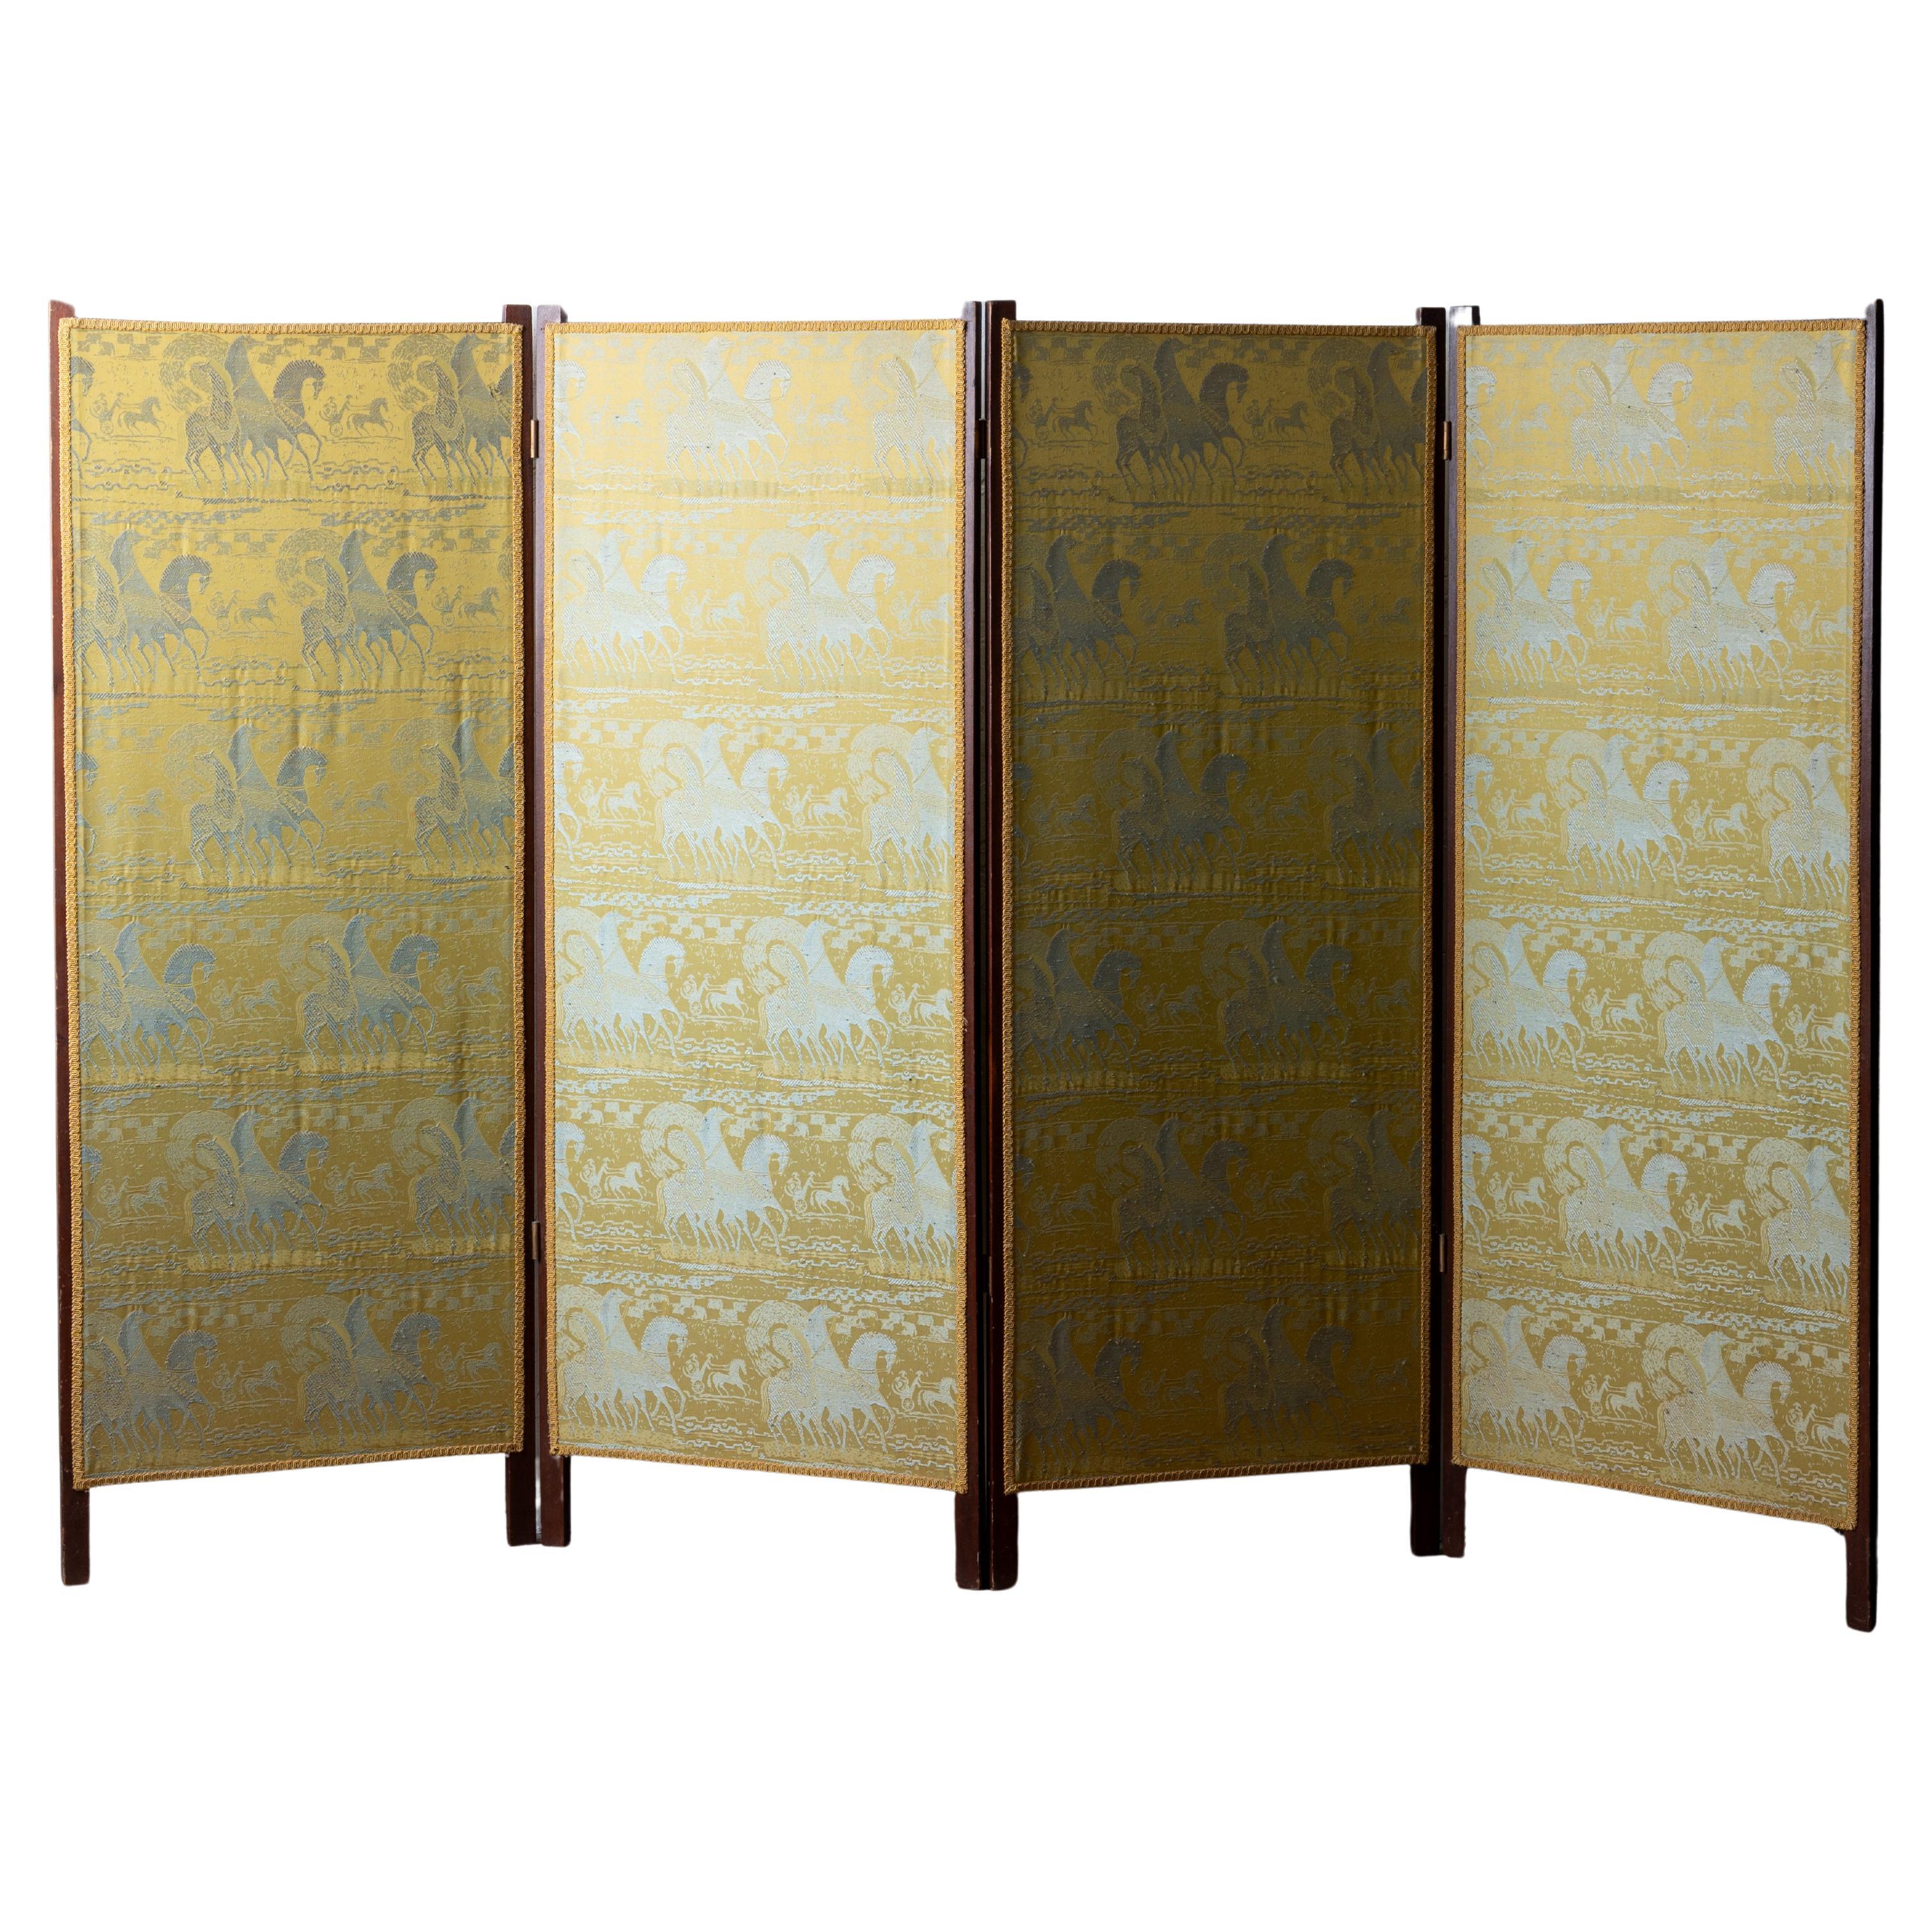 Folding Screen with Tibor Reich Etruscan Horse Fabric For Sale